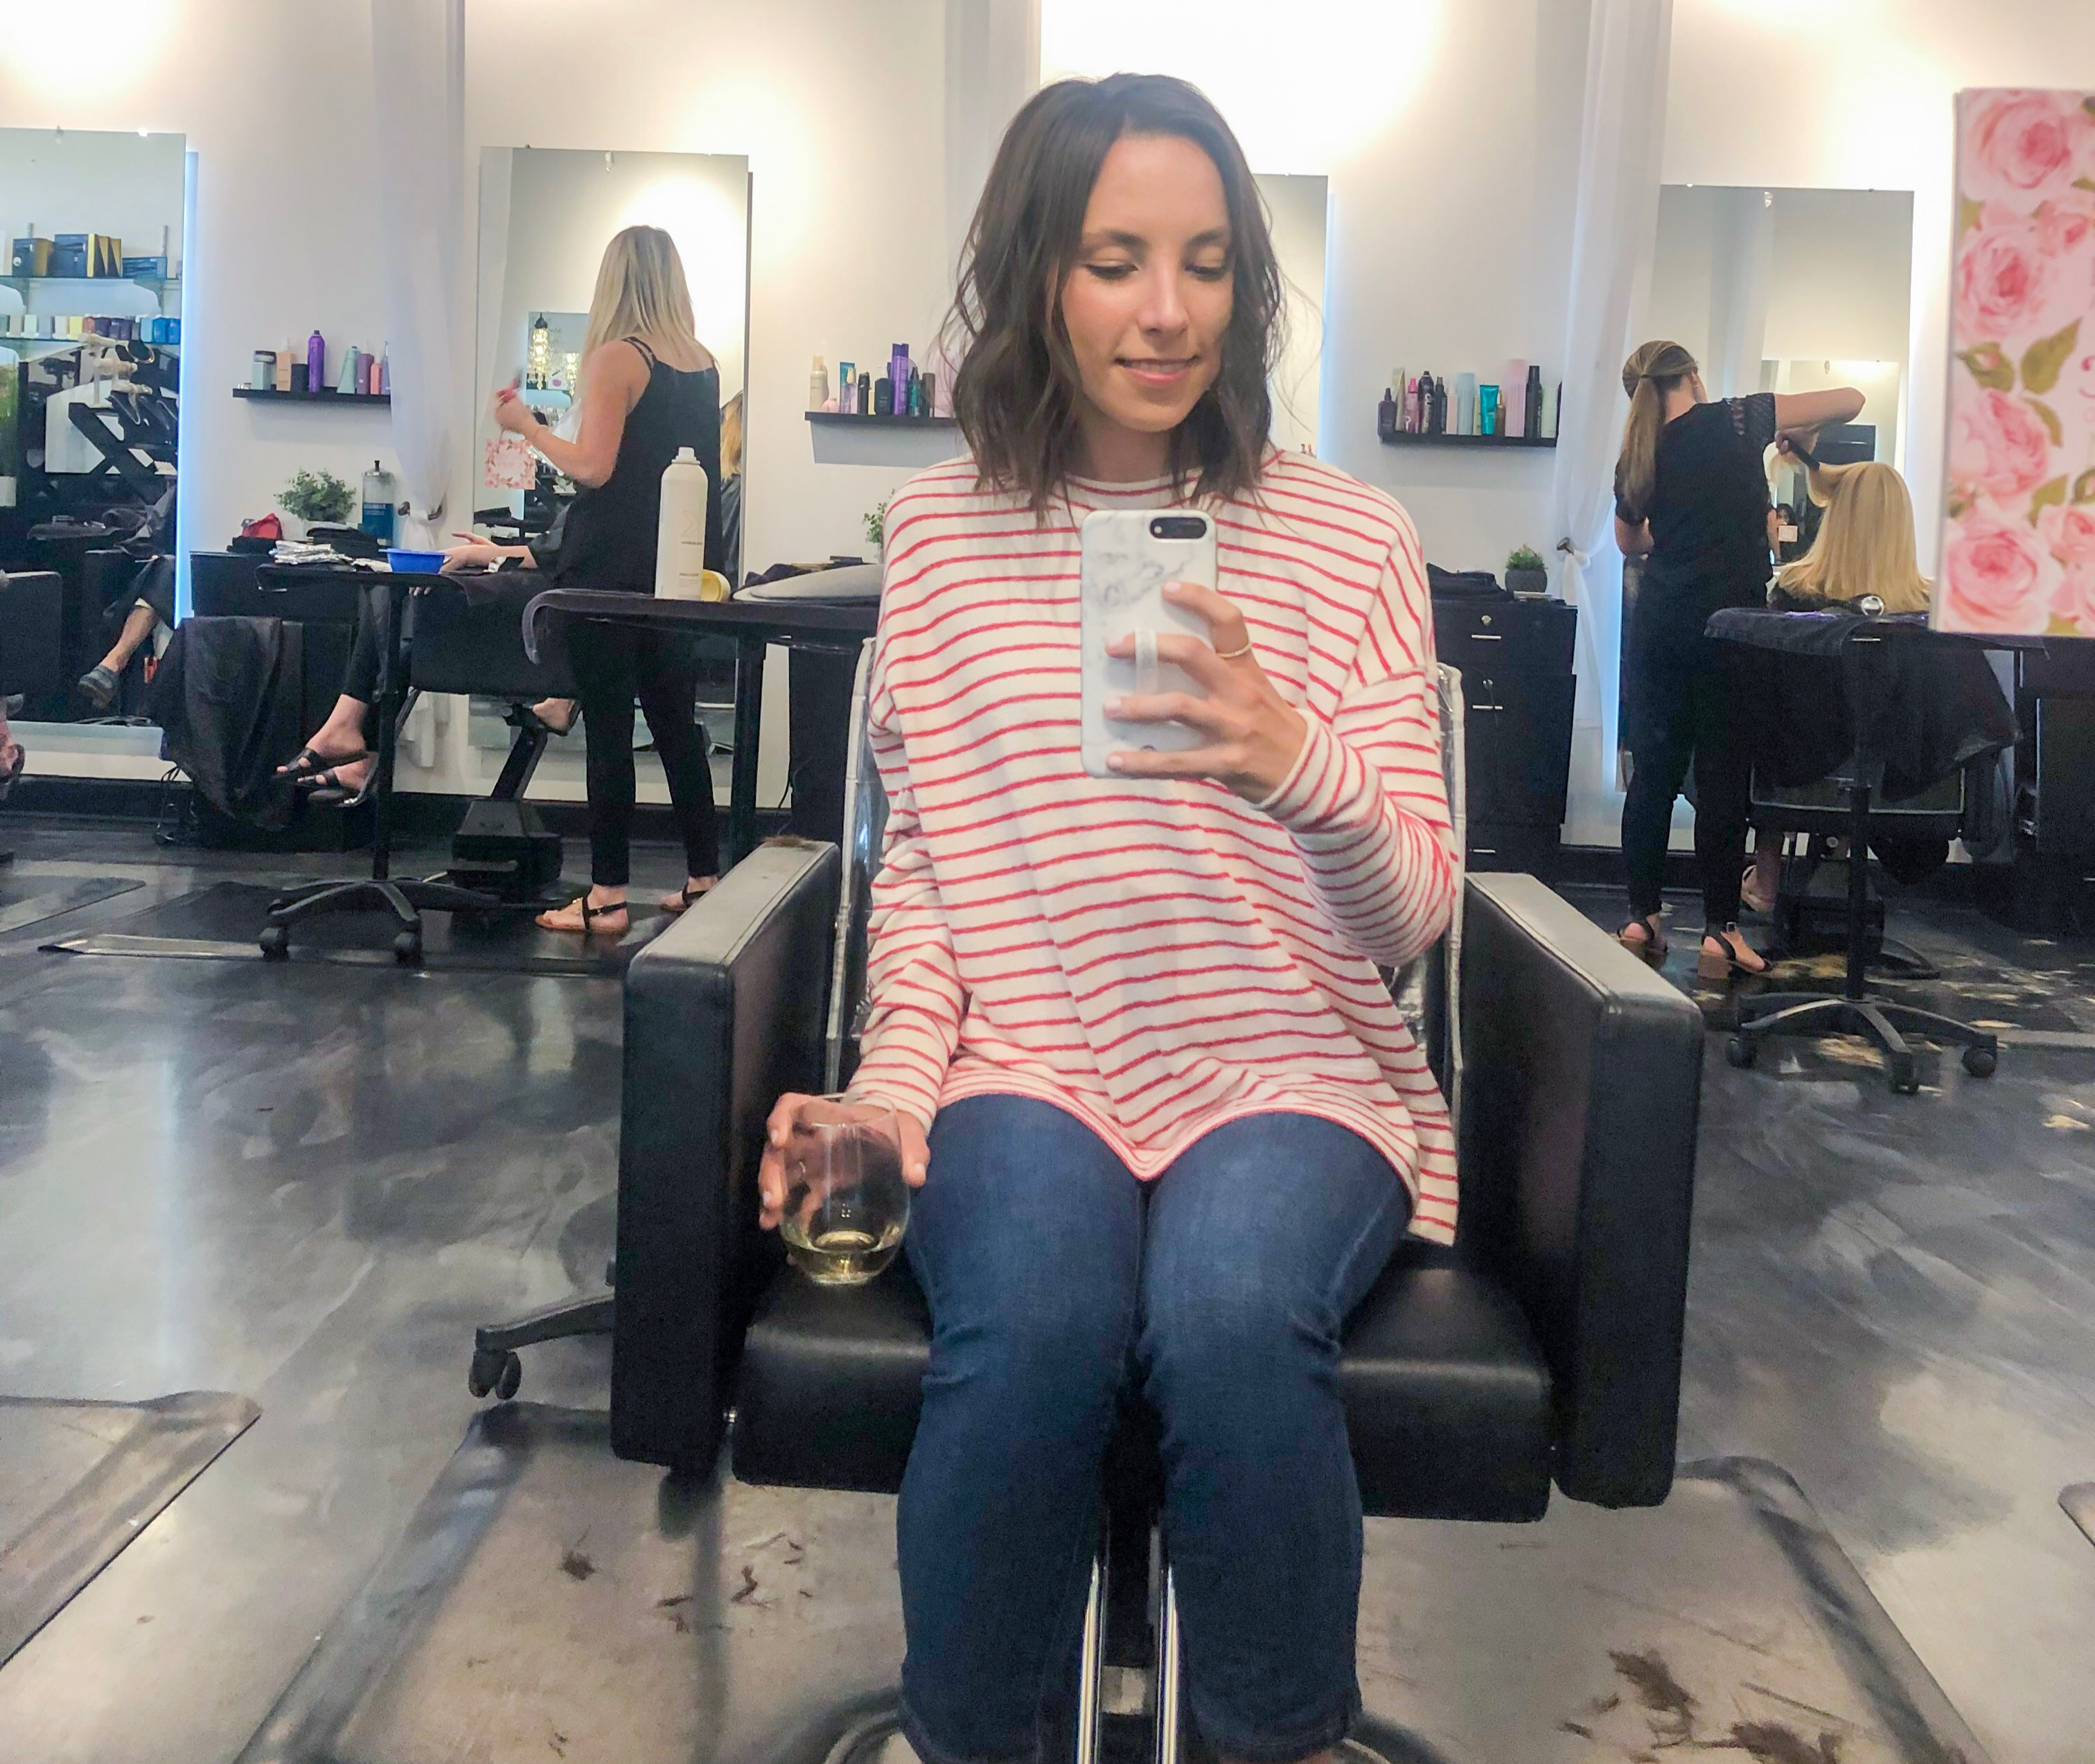 interview with Zoe Woz from Prive Salon and Stylebar in Newtown Square